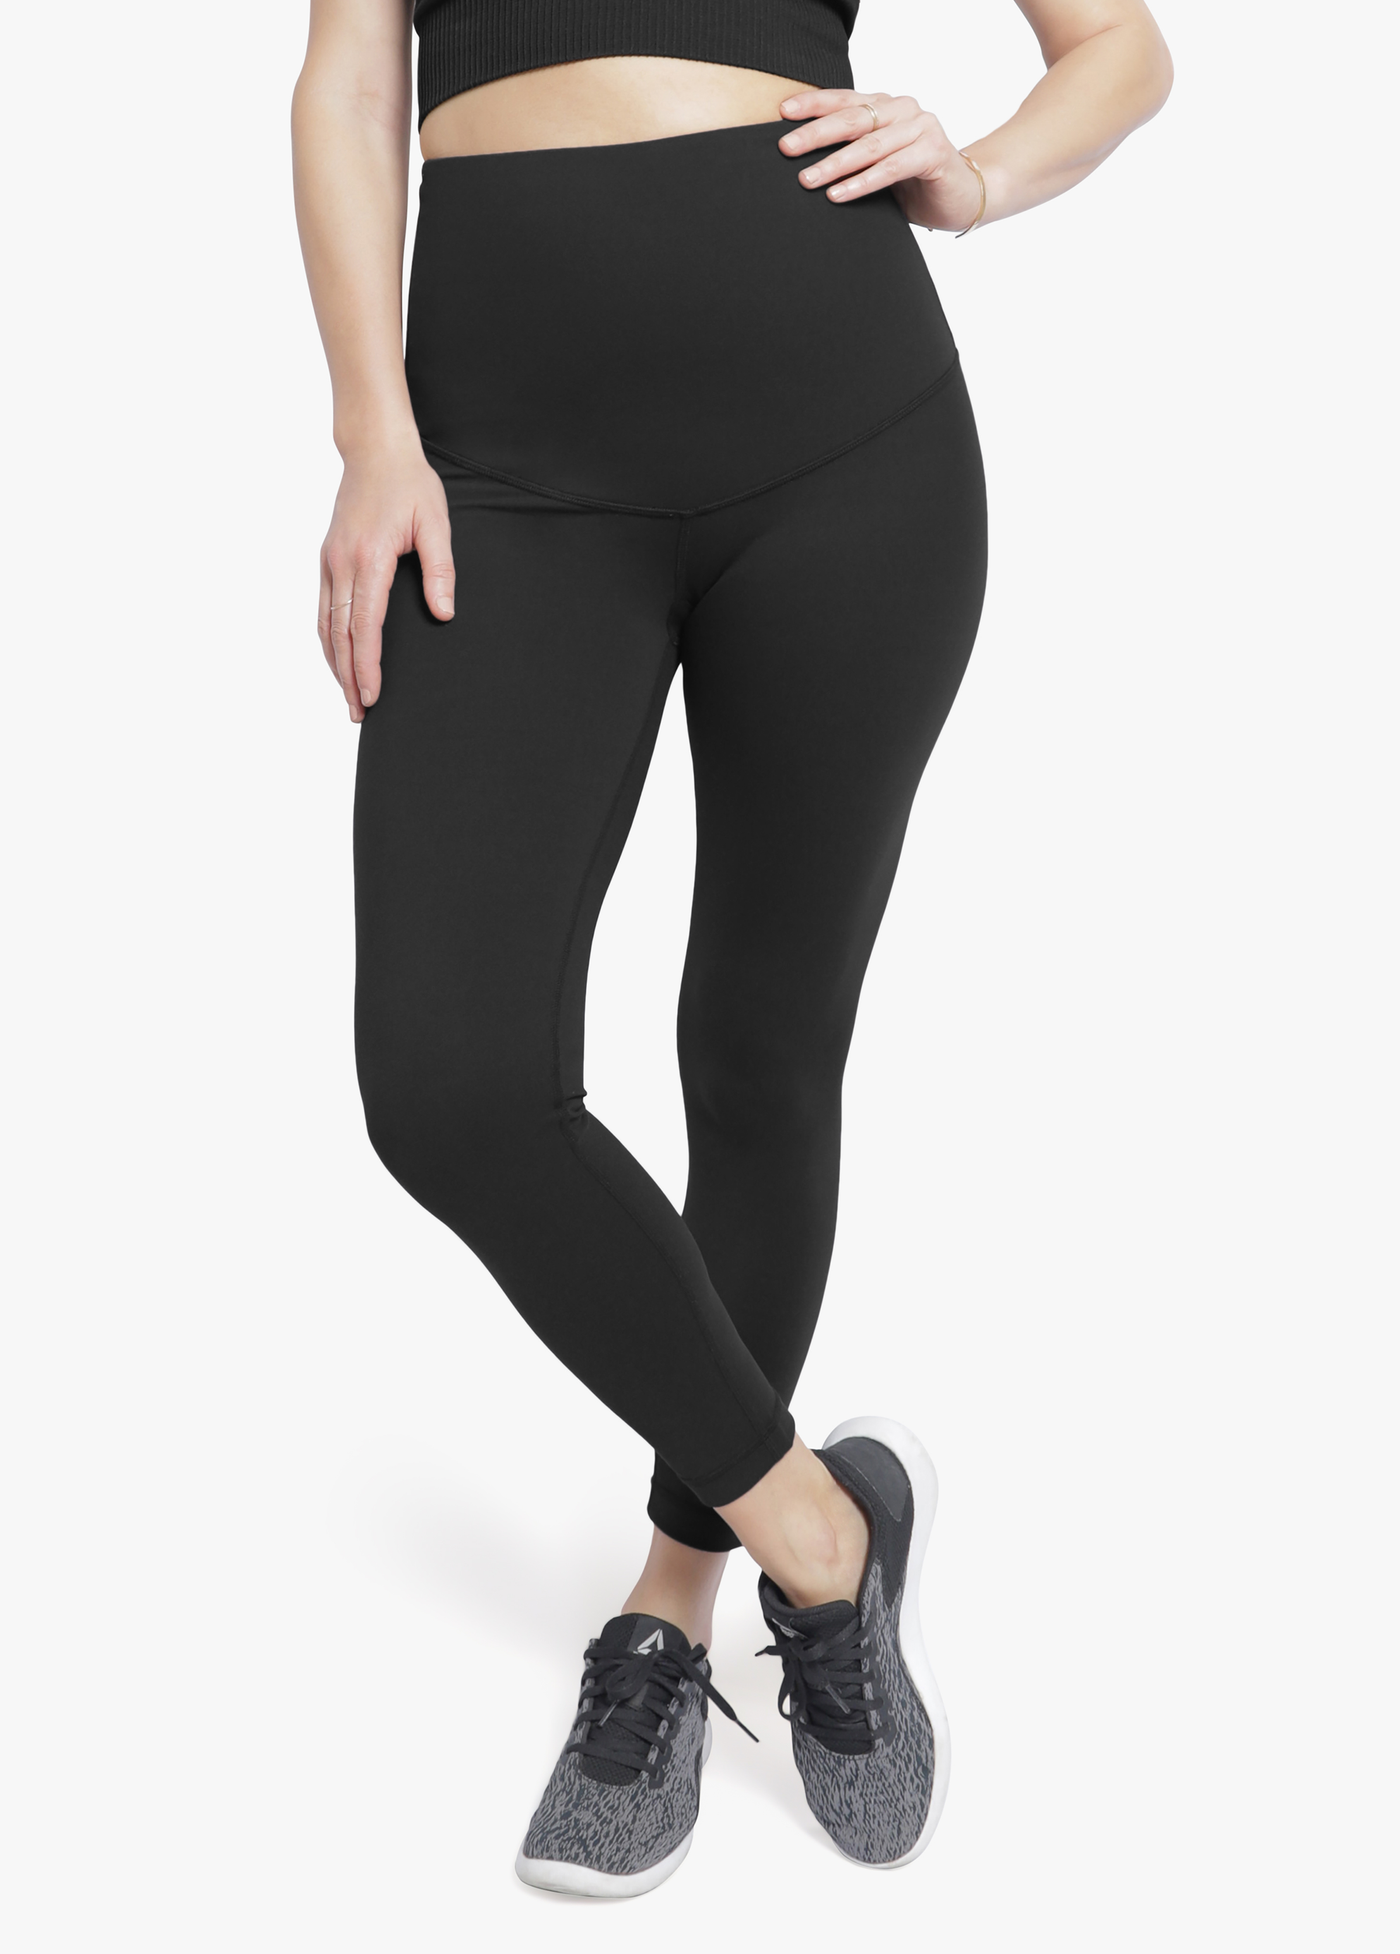 Blue Womens postpartum Compression Tights, Black/blue High waisted